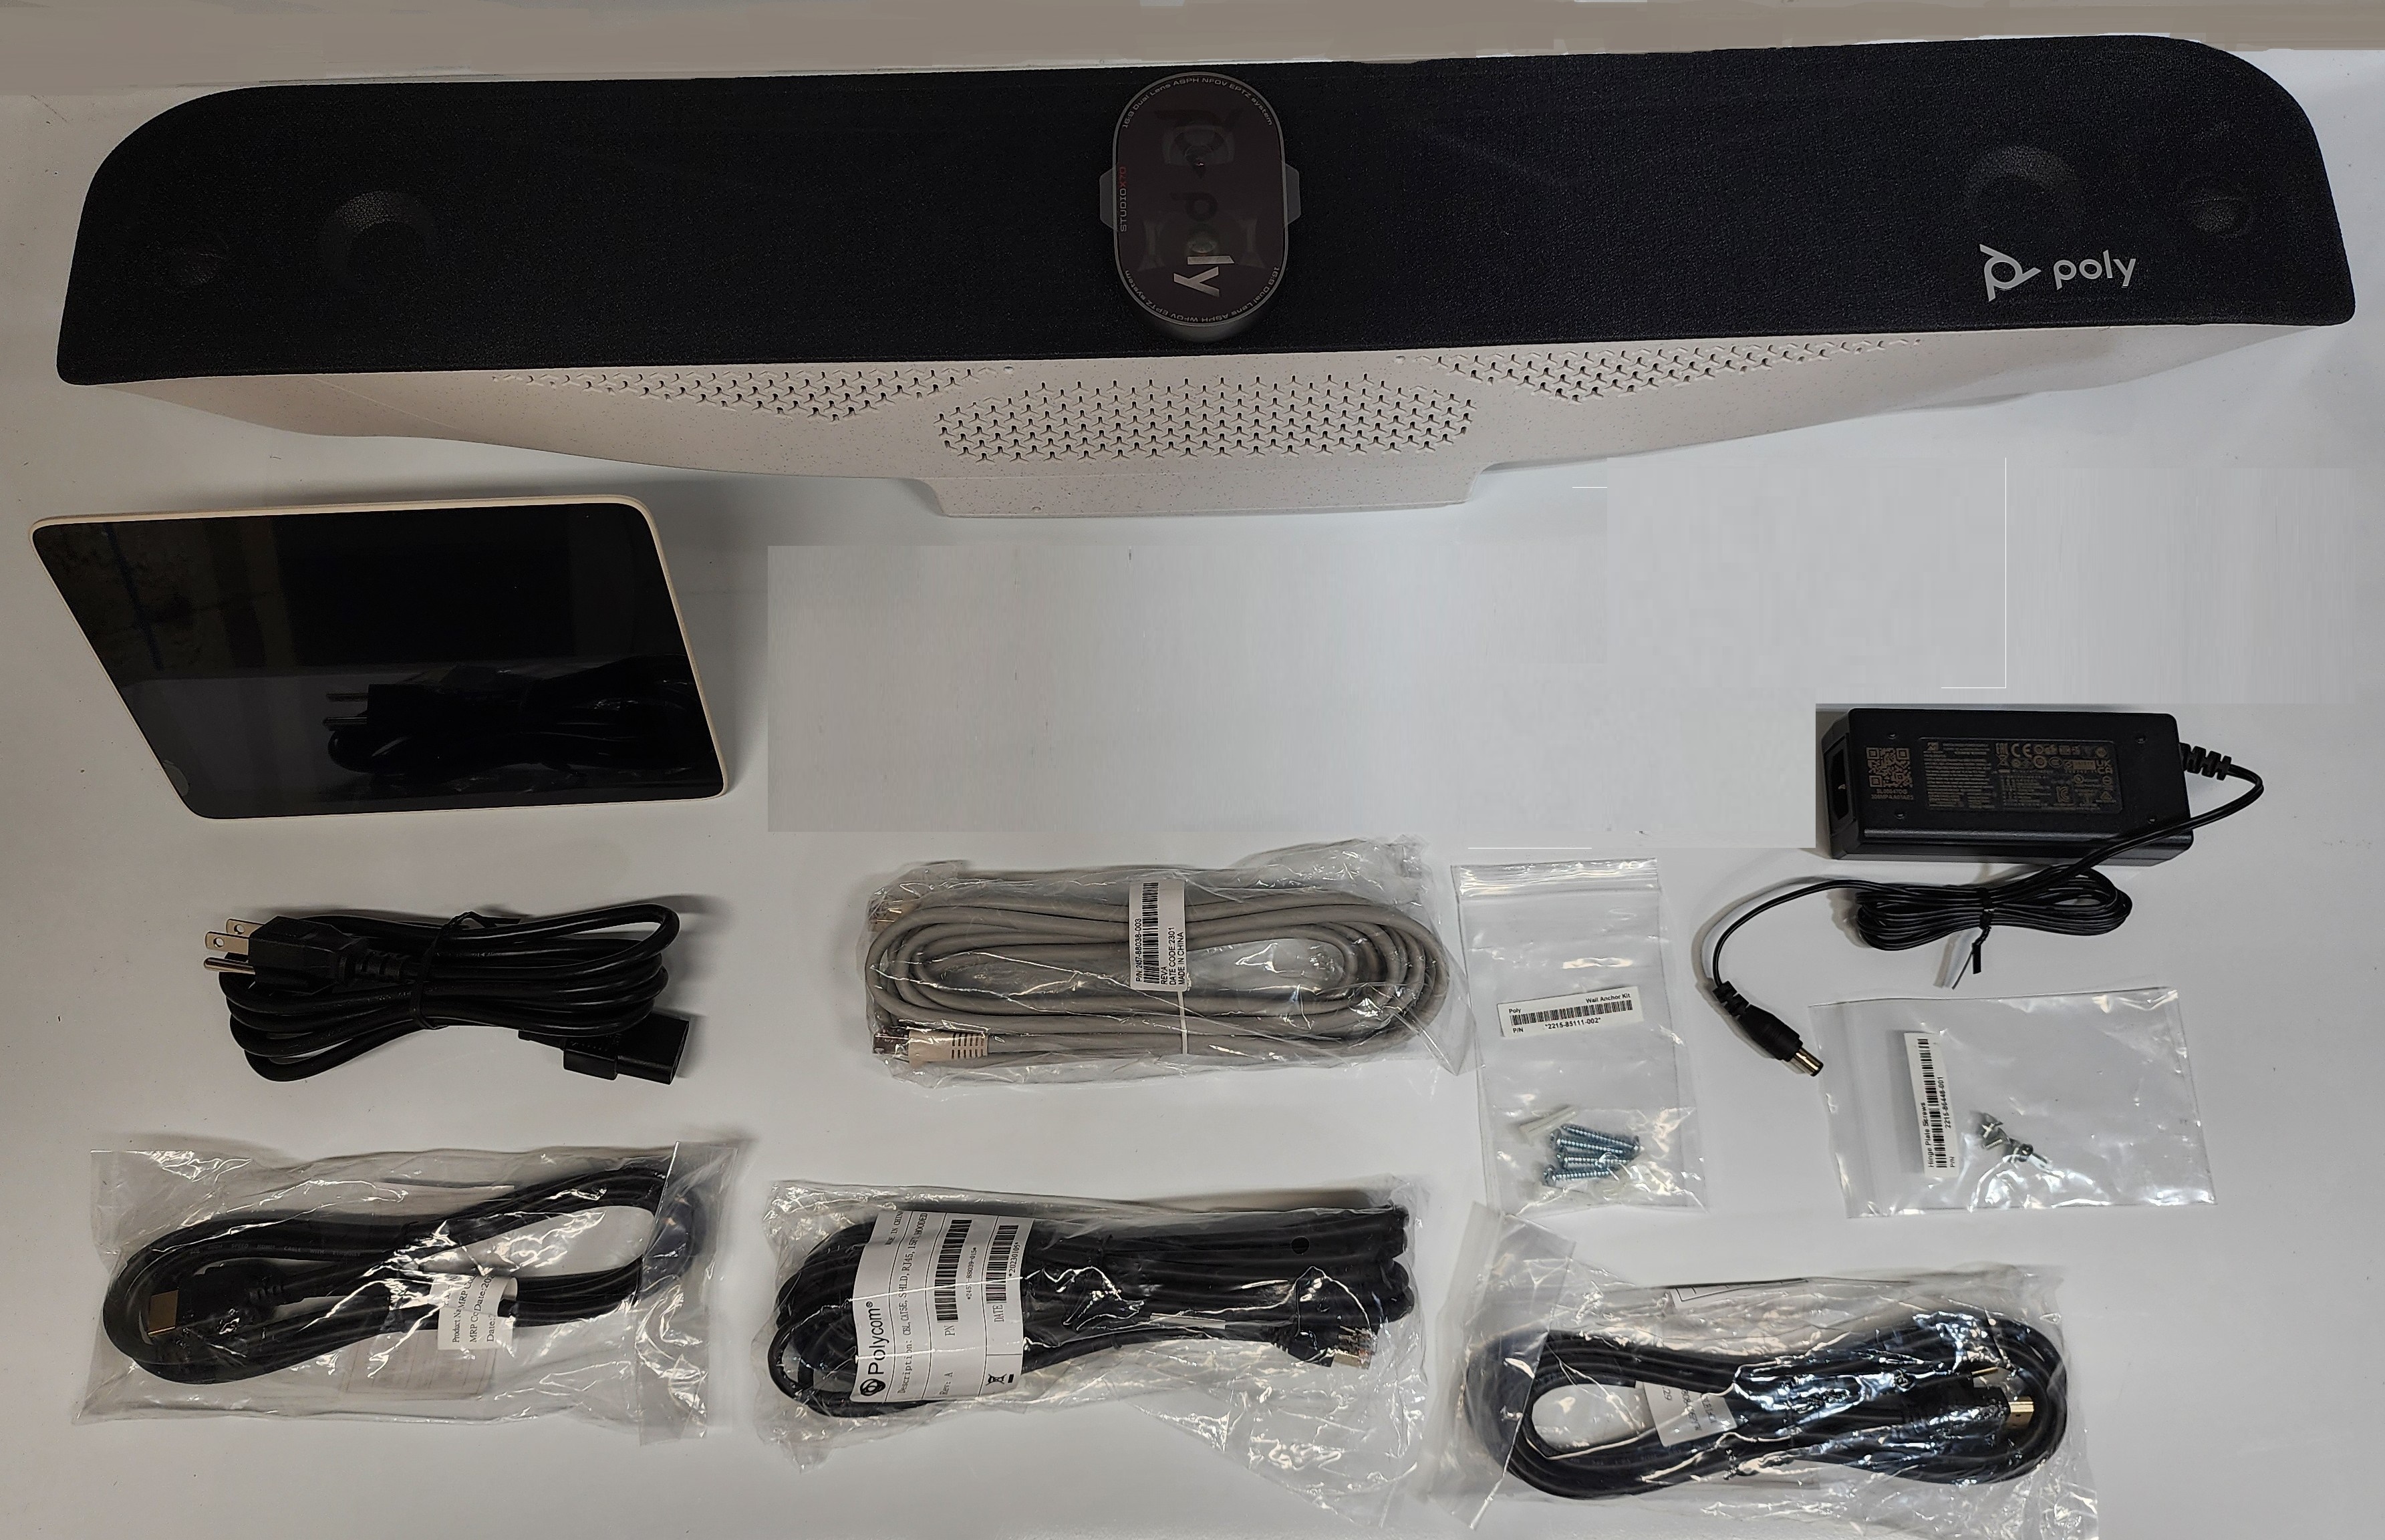 Polycom Poly Studio X70 + TC8 Video Bar Camera Large Rooms Conferencing System 7200-87300-001 (No Mounting Brackets)